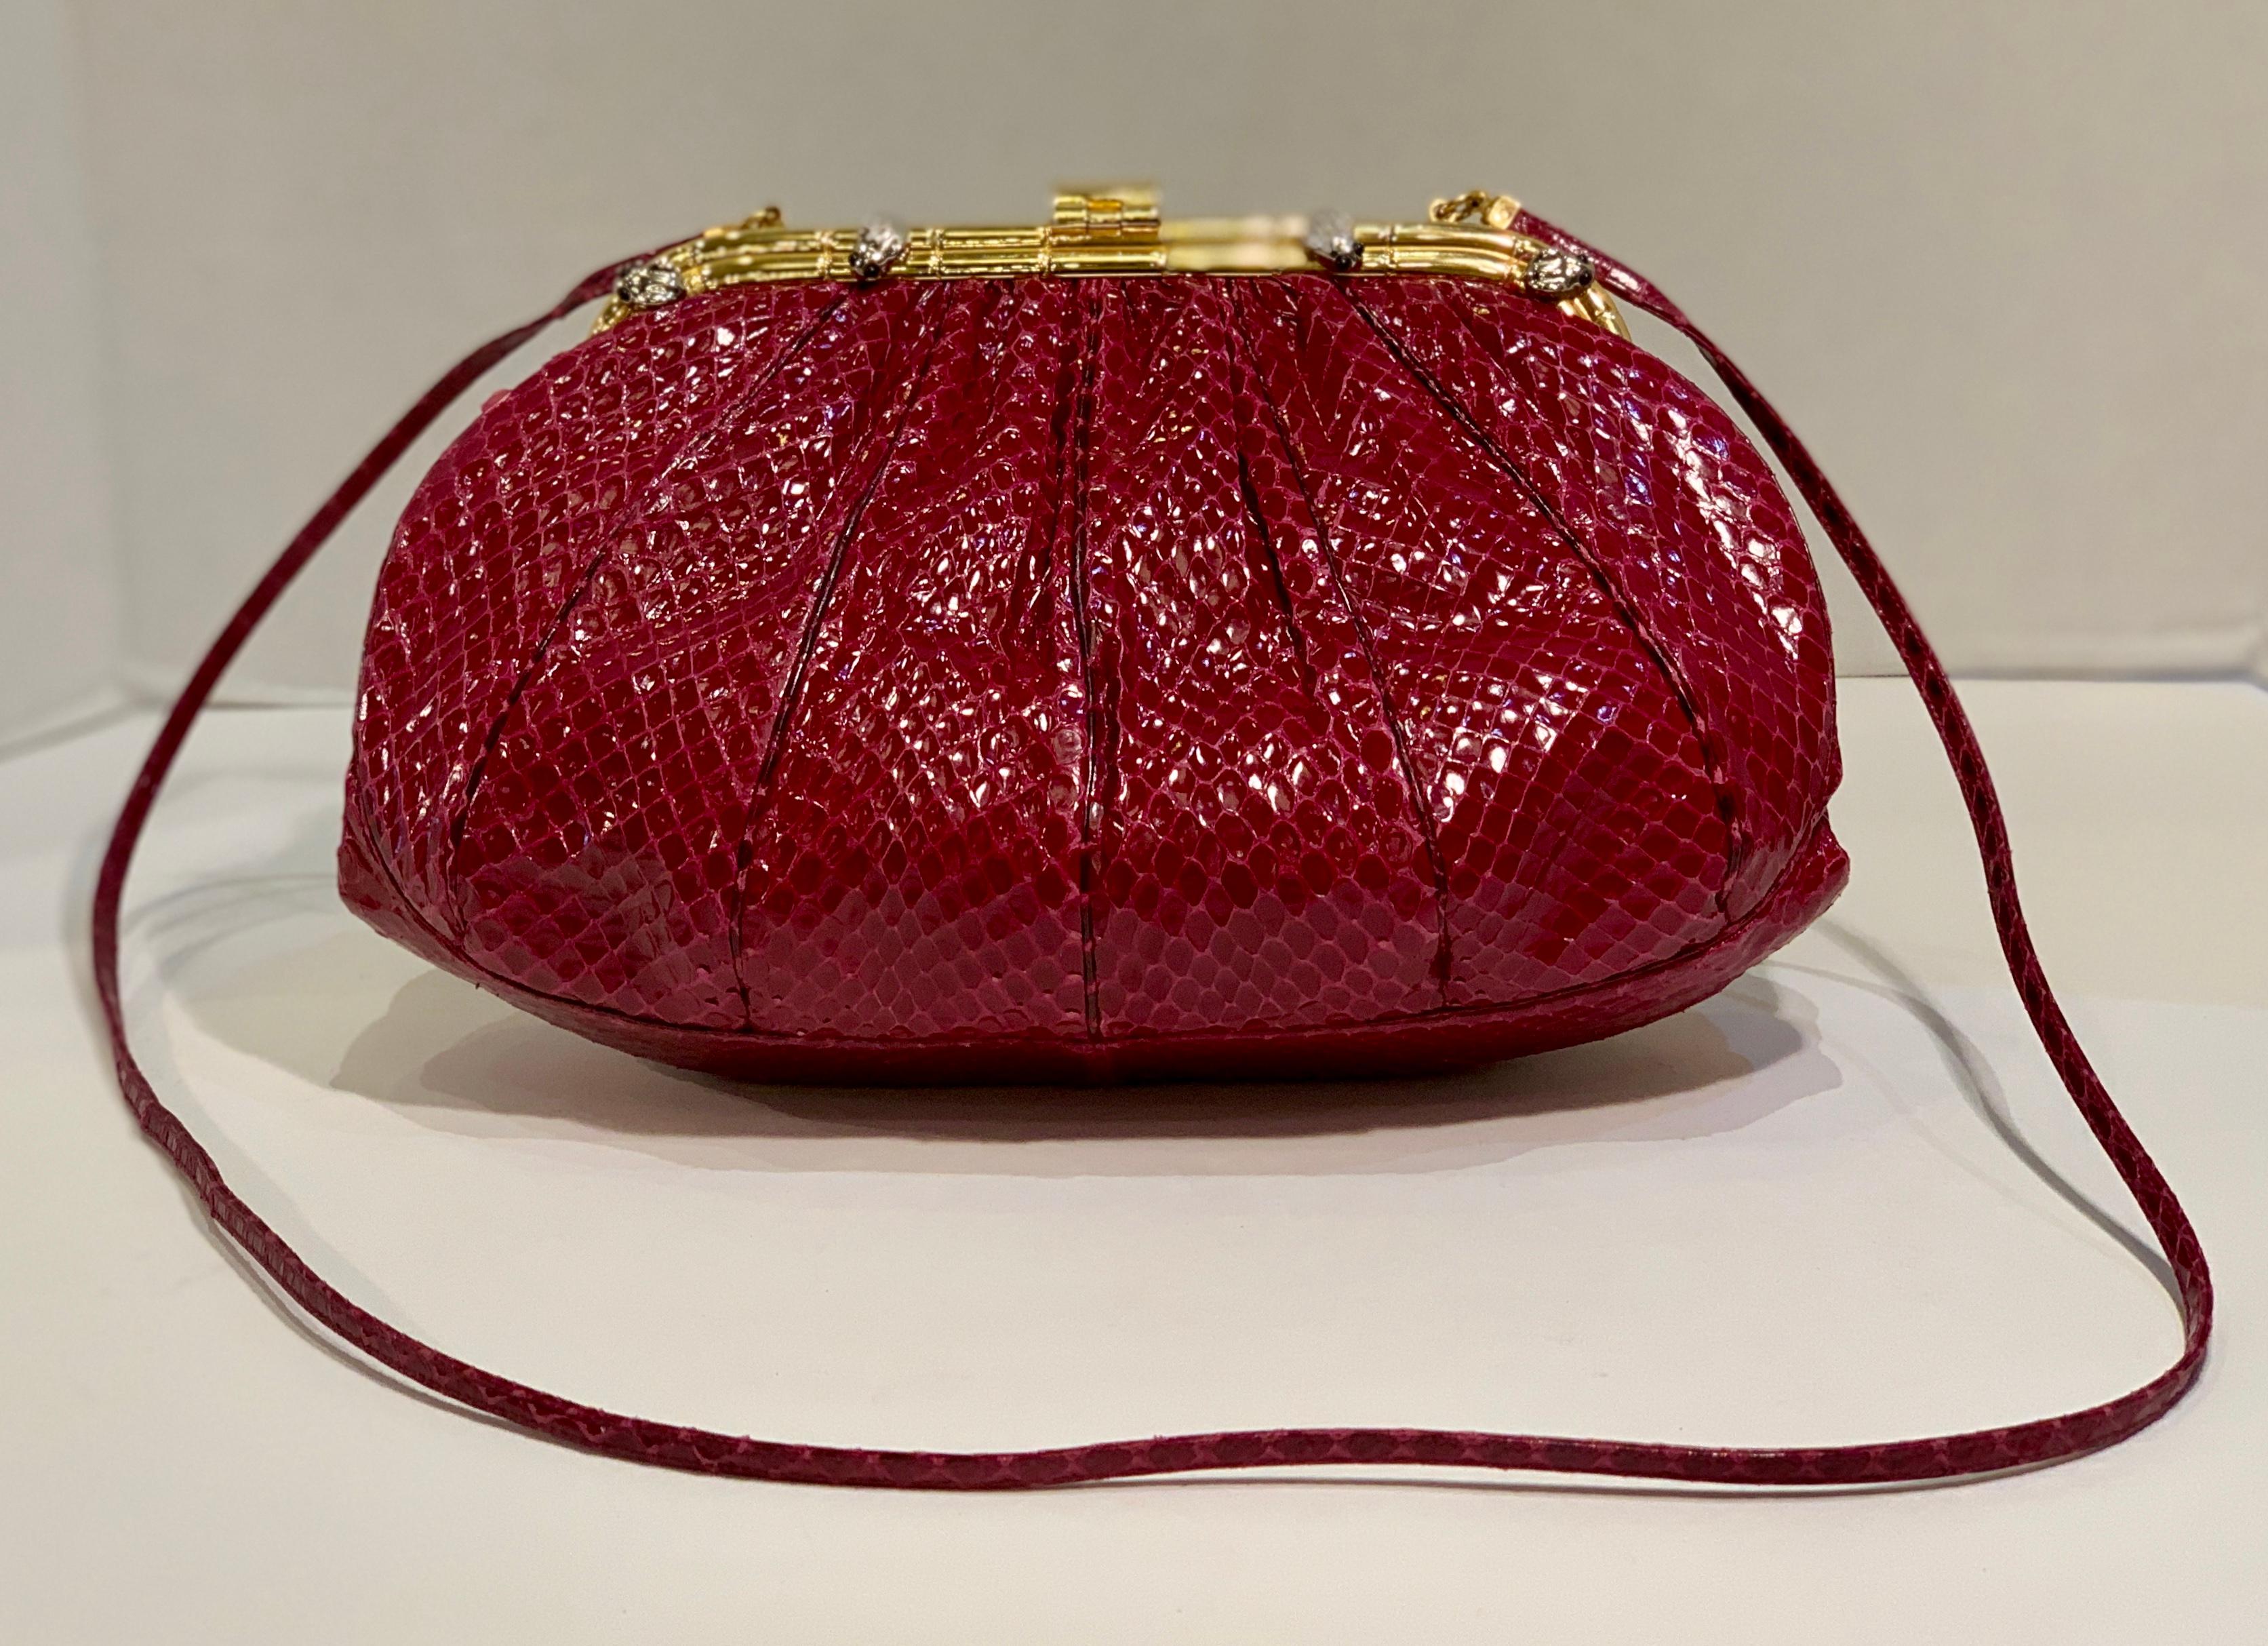 Collectible vintage Judith Leiber 1980's burgundy snakeskin leather evening bag, purse or clutch features a burgundy or wine-colored glossy snakeskin exterior gathered into a hinged gold metal frame at the top.  Frame with kiss top closure has a